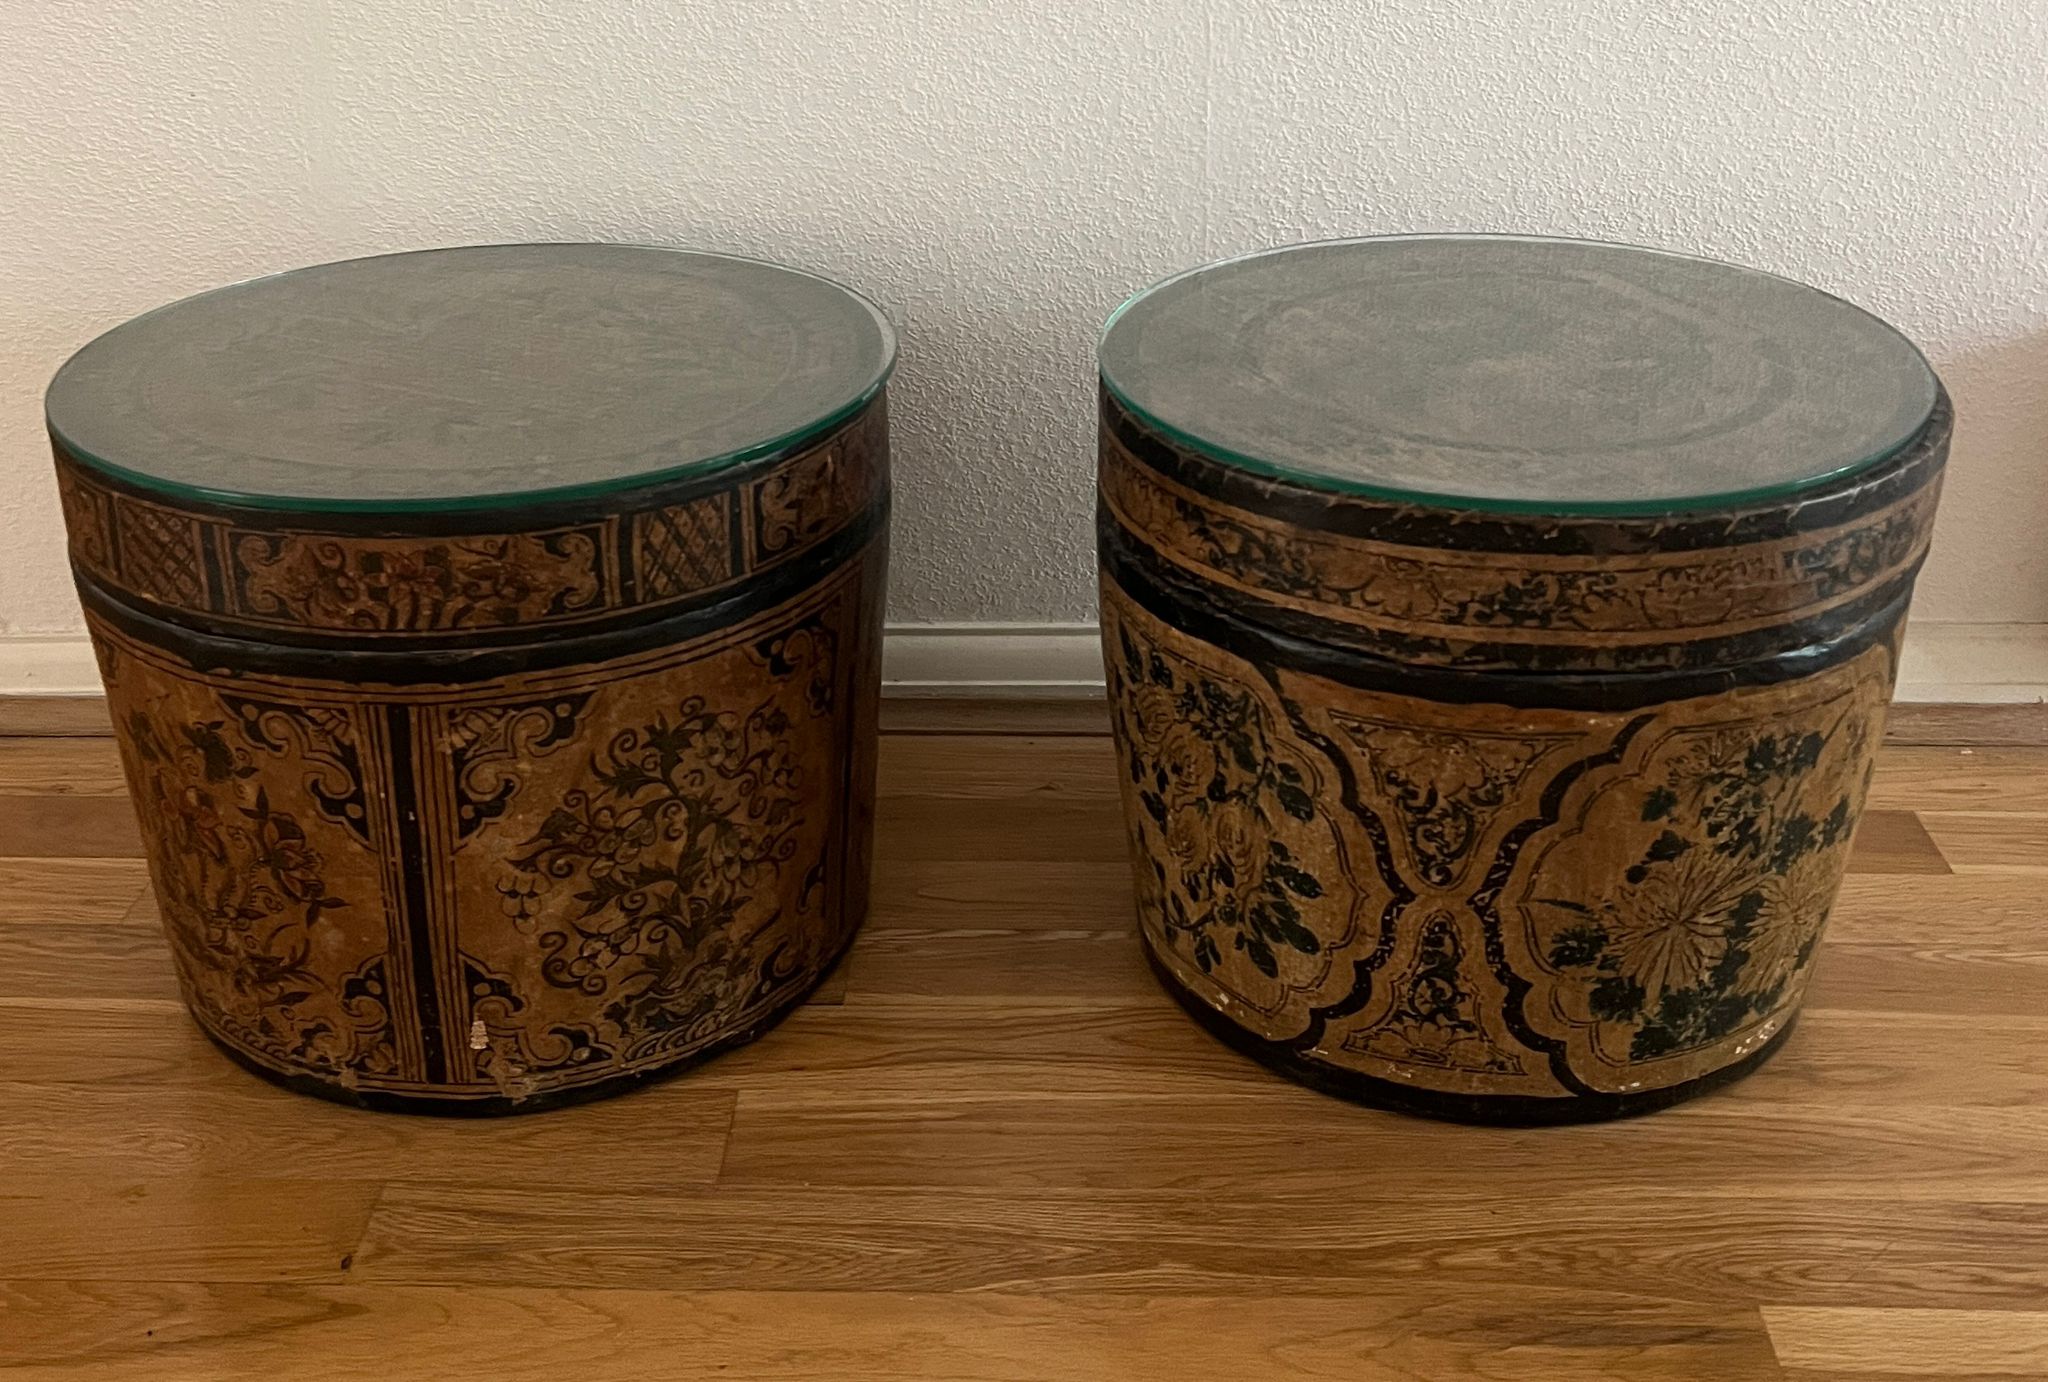 A pair of Oriental papier-mâché lidded boxes with glass tops, being used as lamp tables. (H 32cm x